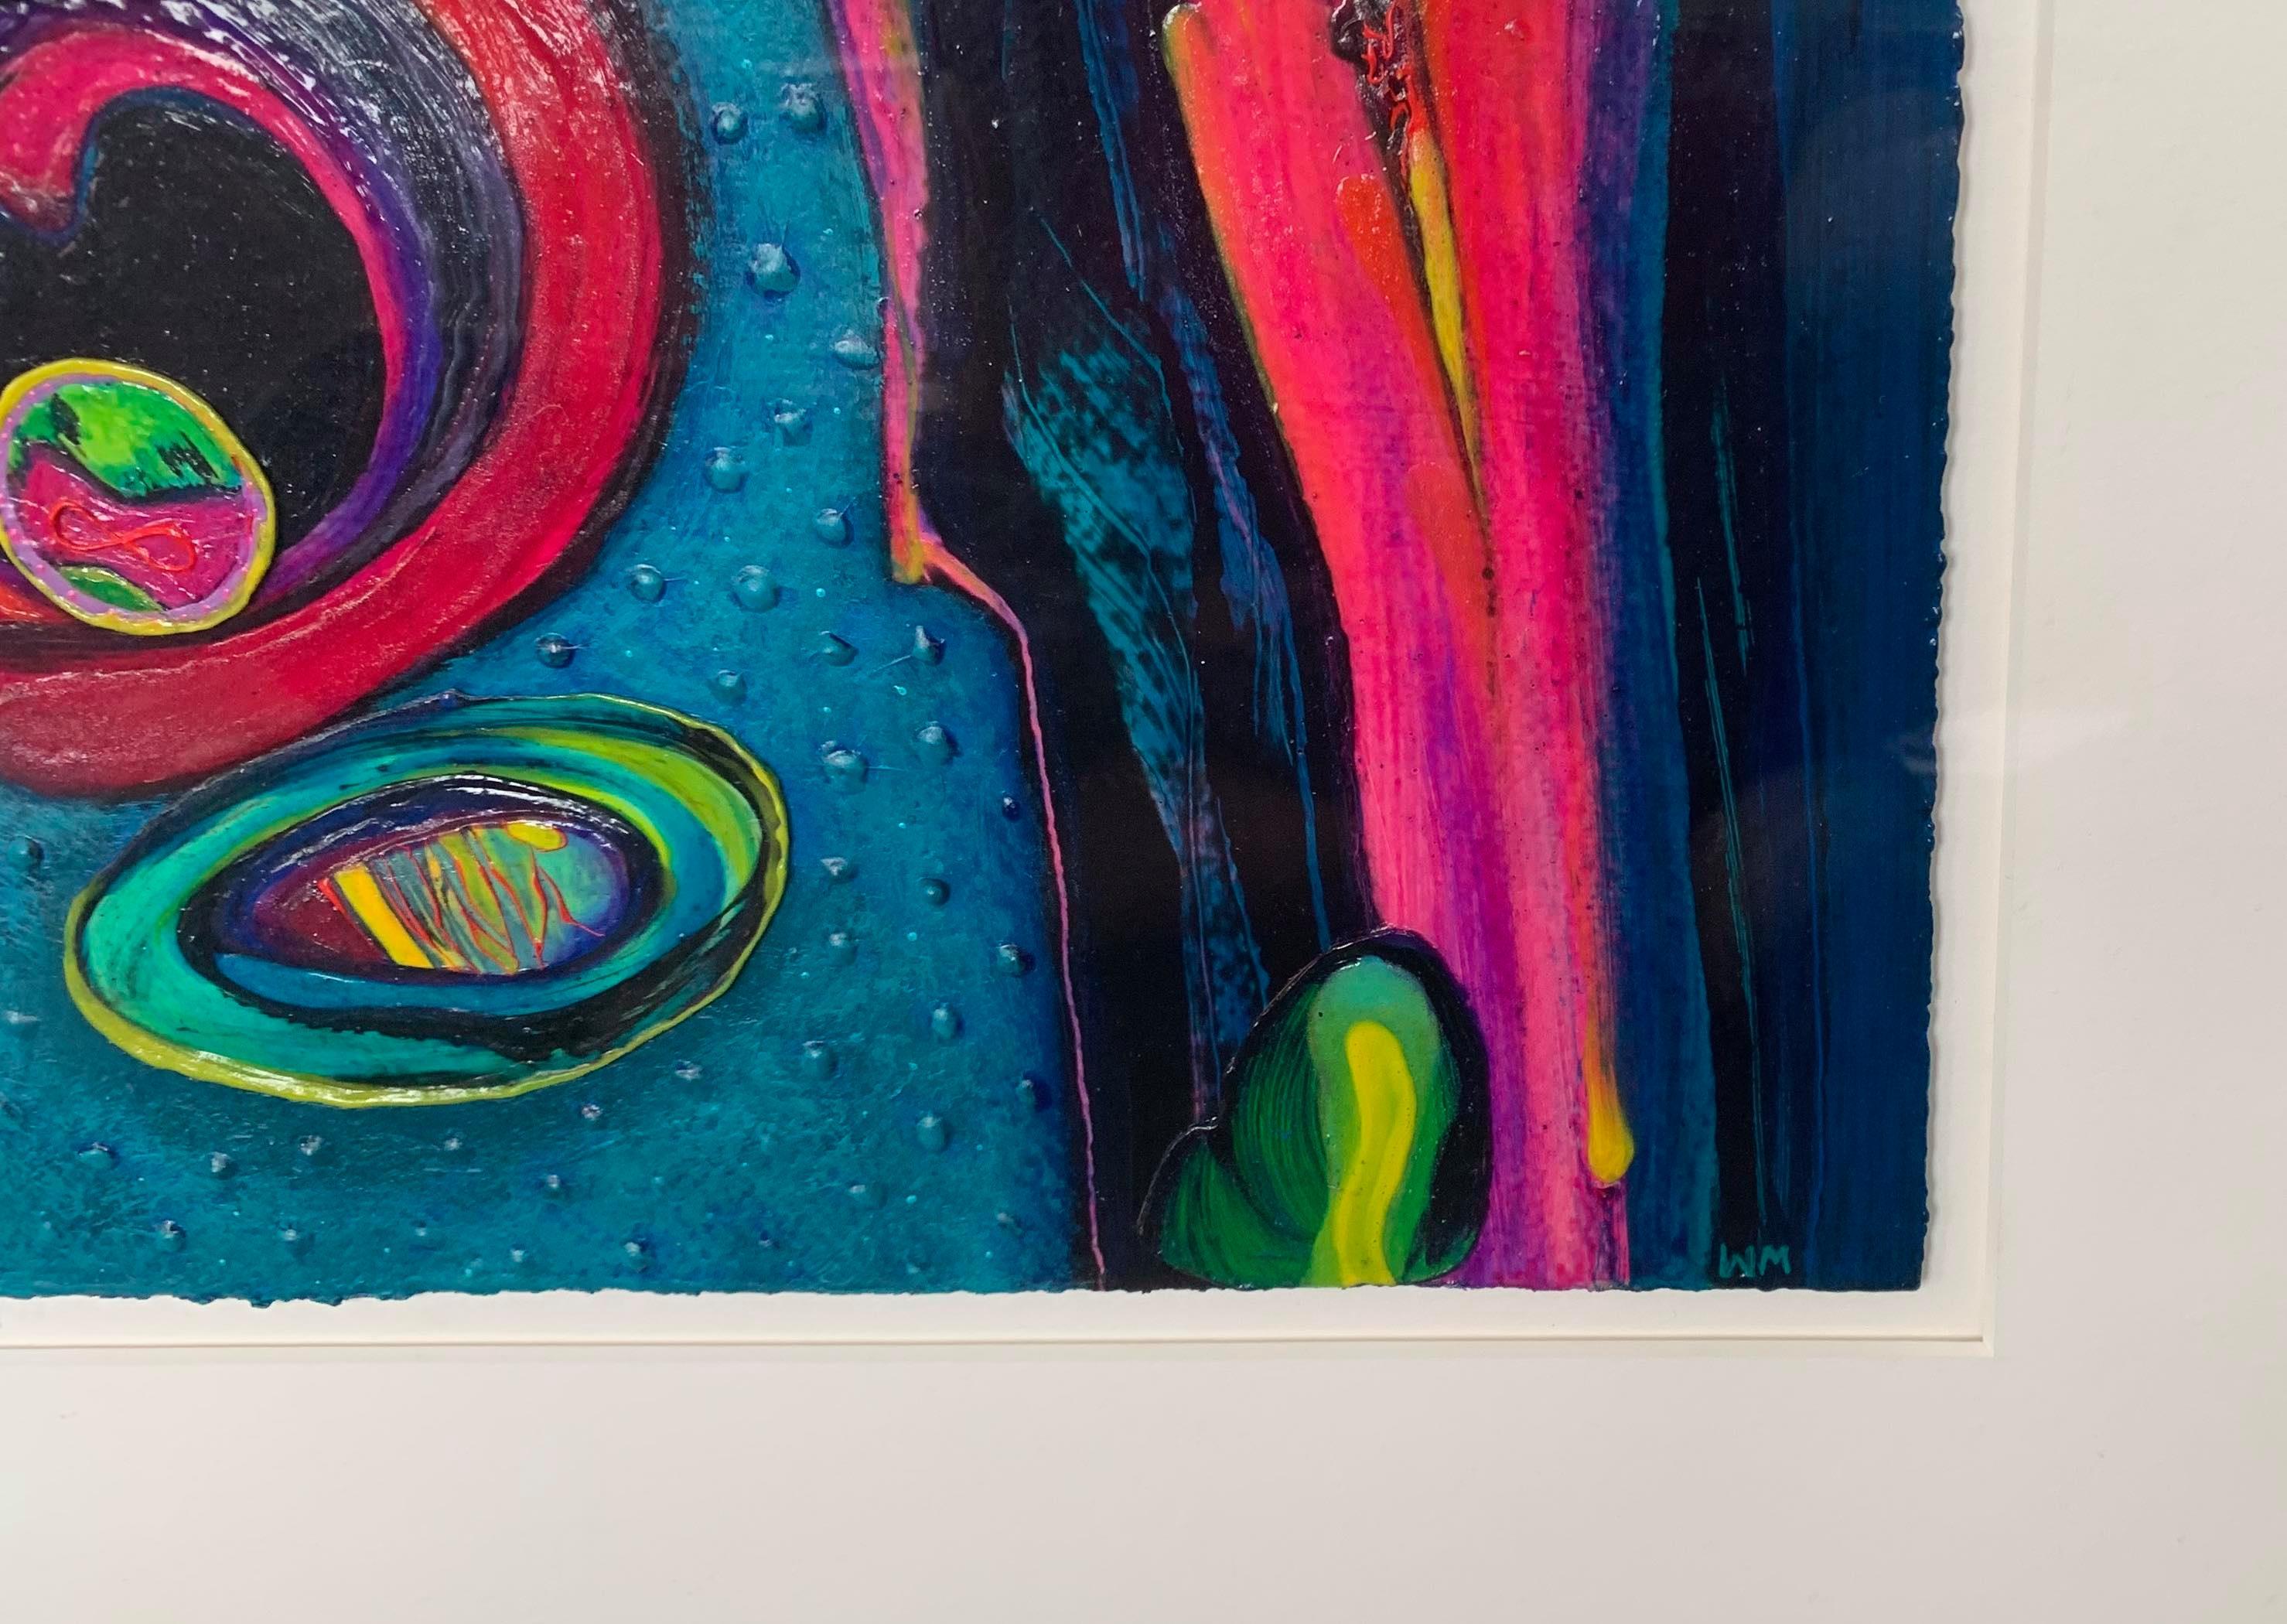 This abstract acrylic on paper painting uses bright color and a glazed paint texture to bring a dynamic feeling to this painting's composition. Brilliant cyan, quinacridone magentas, and accents of bright green enhance the burnished appearance of